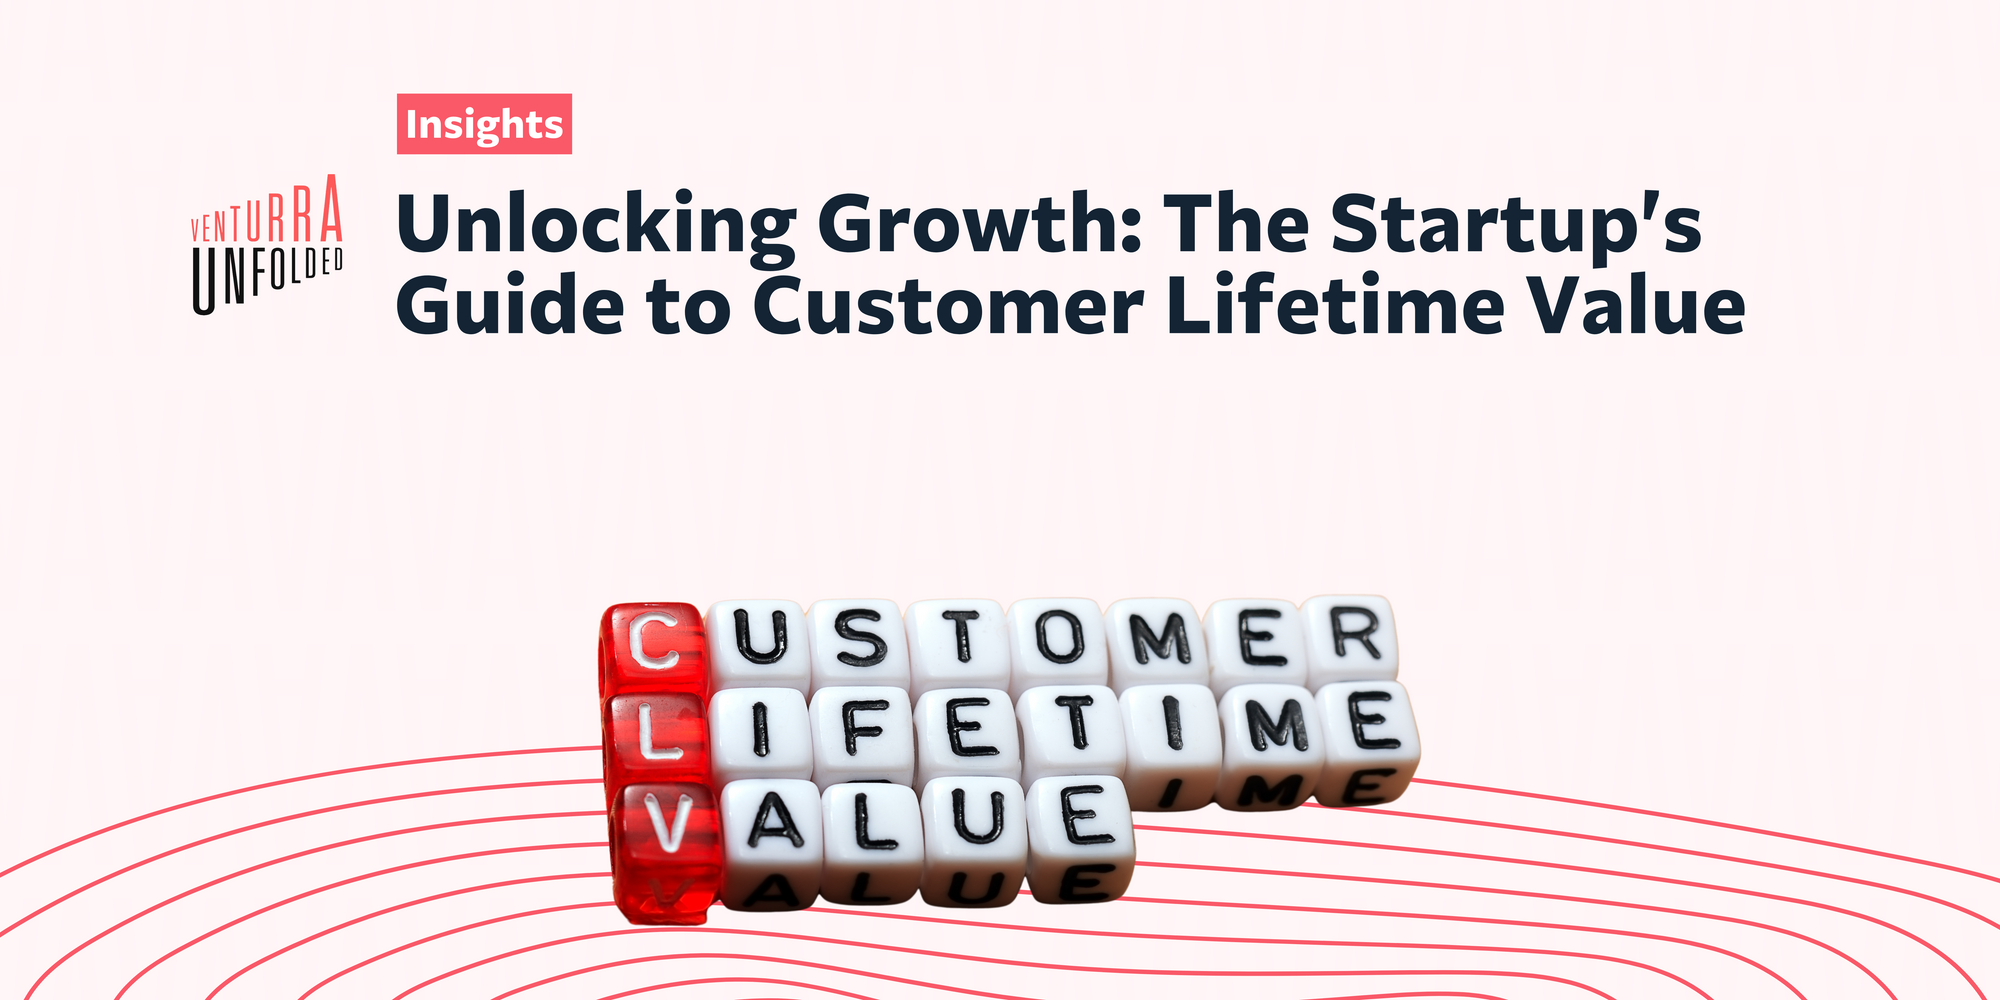 Unlocking Growth: The Startup's Guide to Customer Lifetime Value